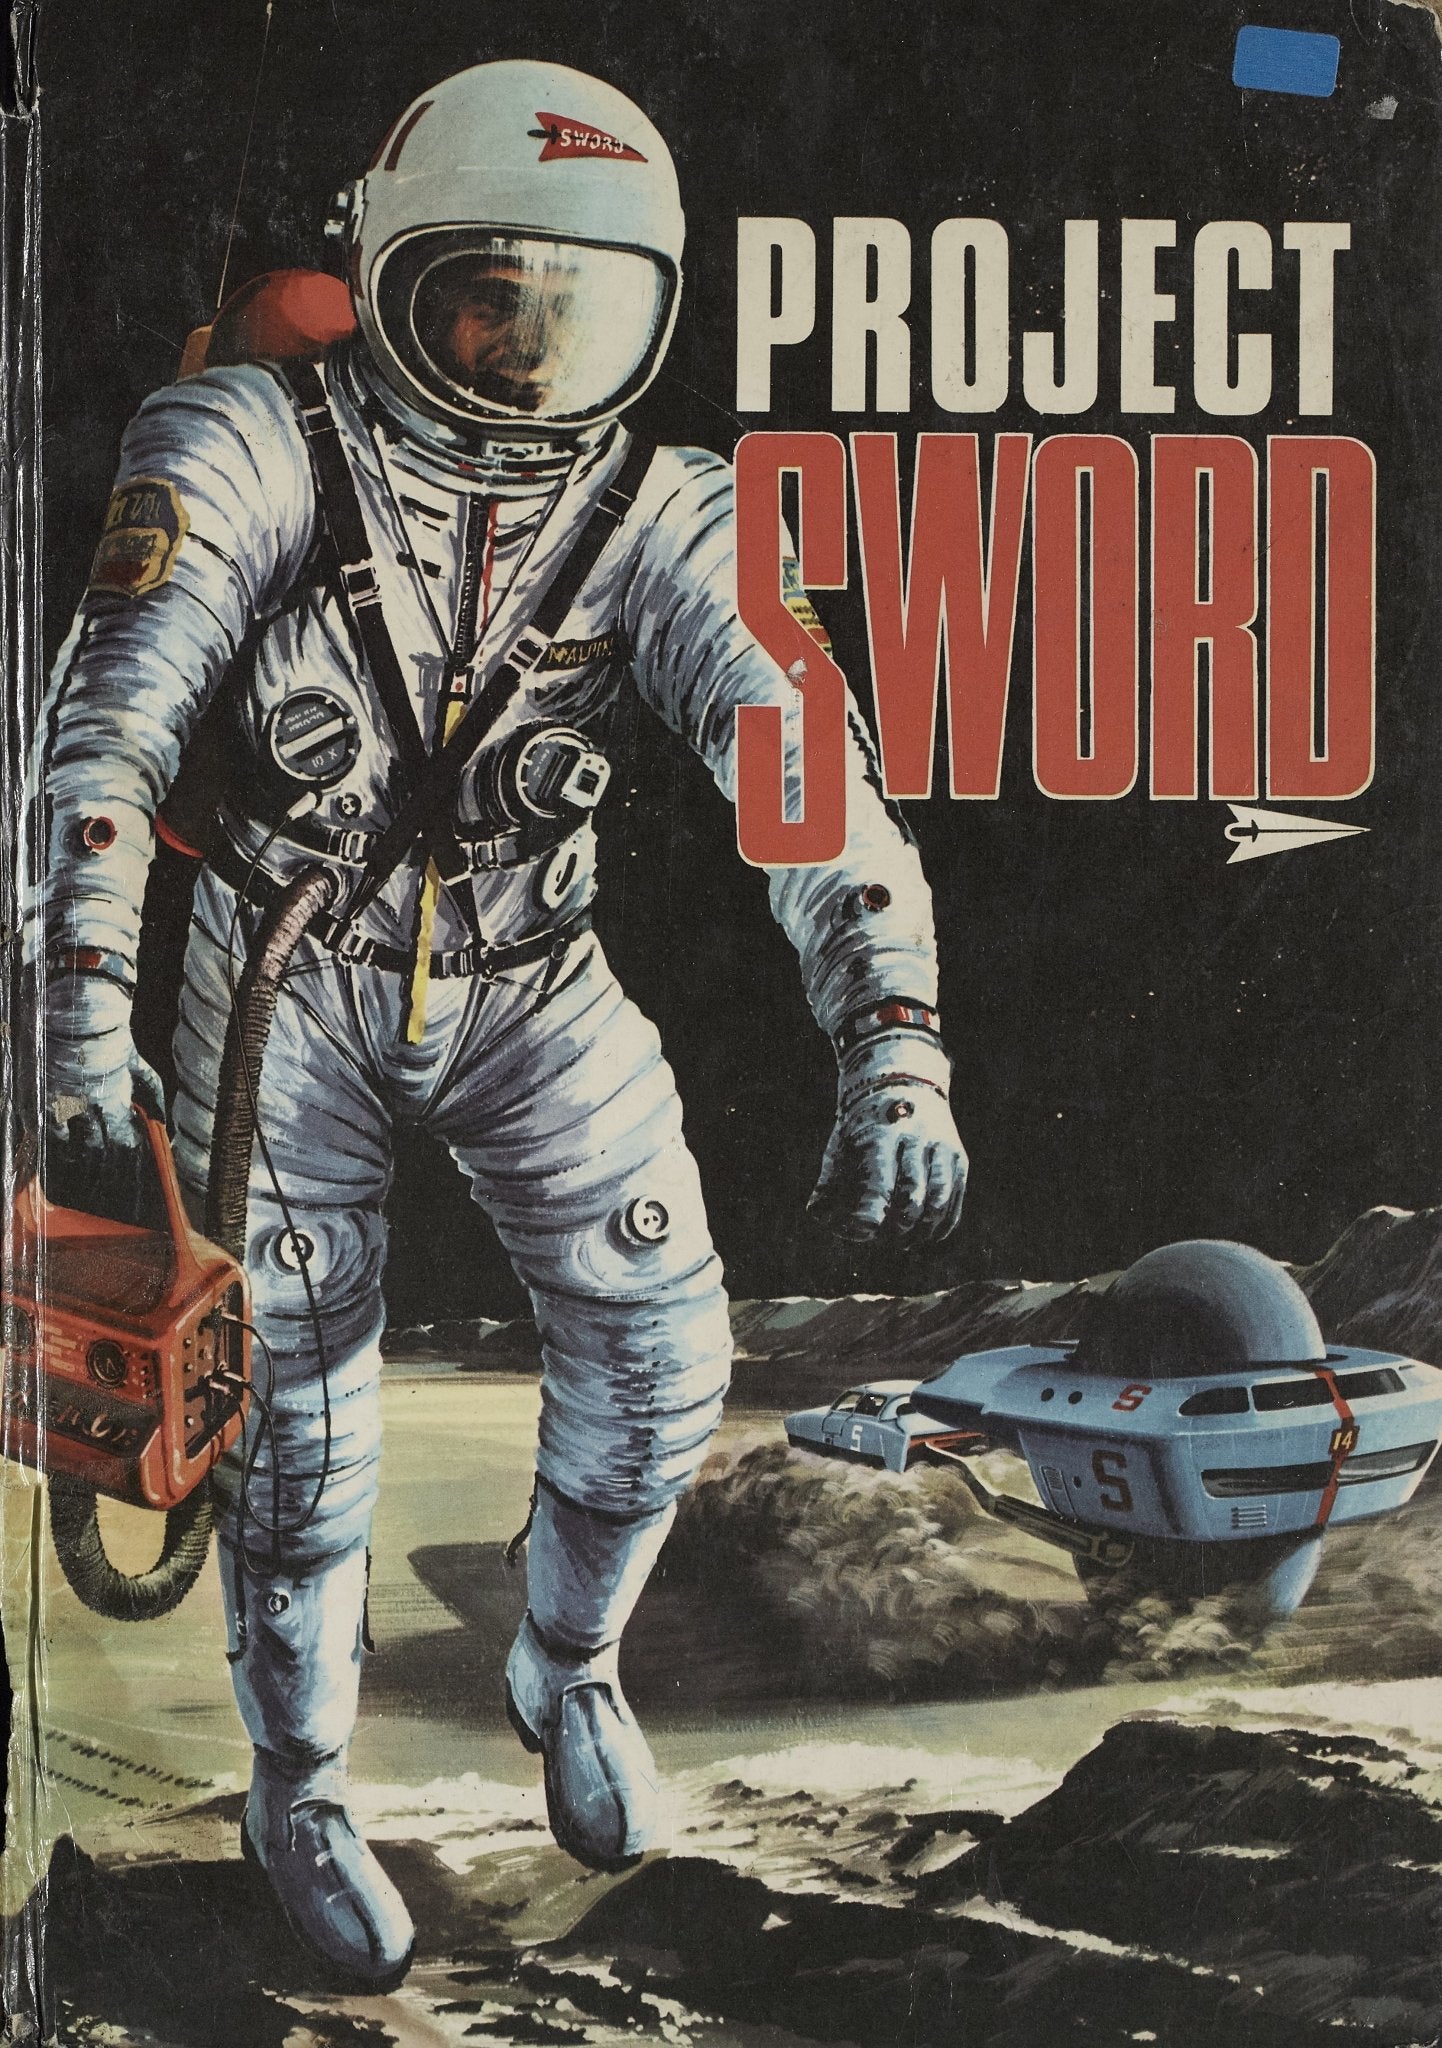 Project SWORD - The Gerry Anderson Store